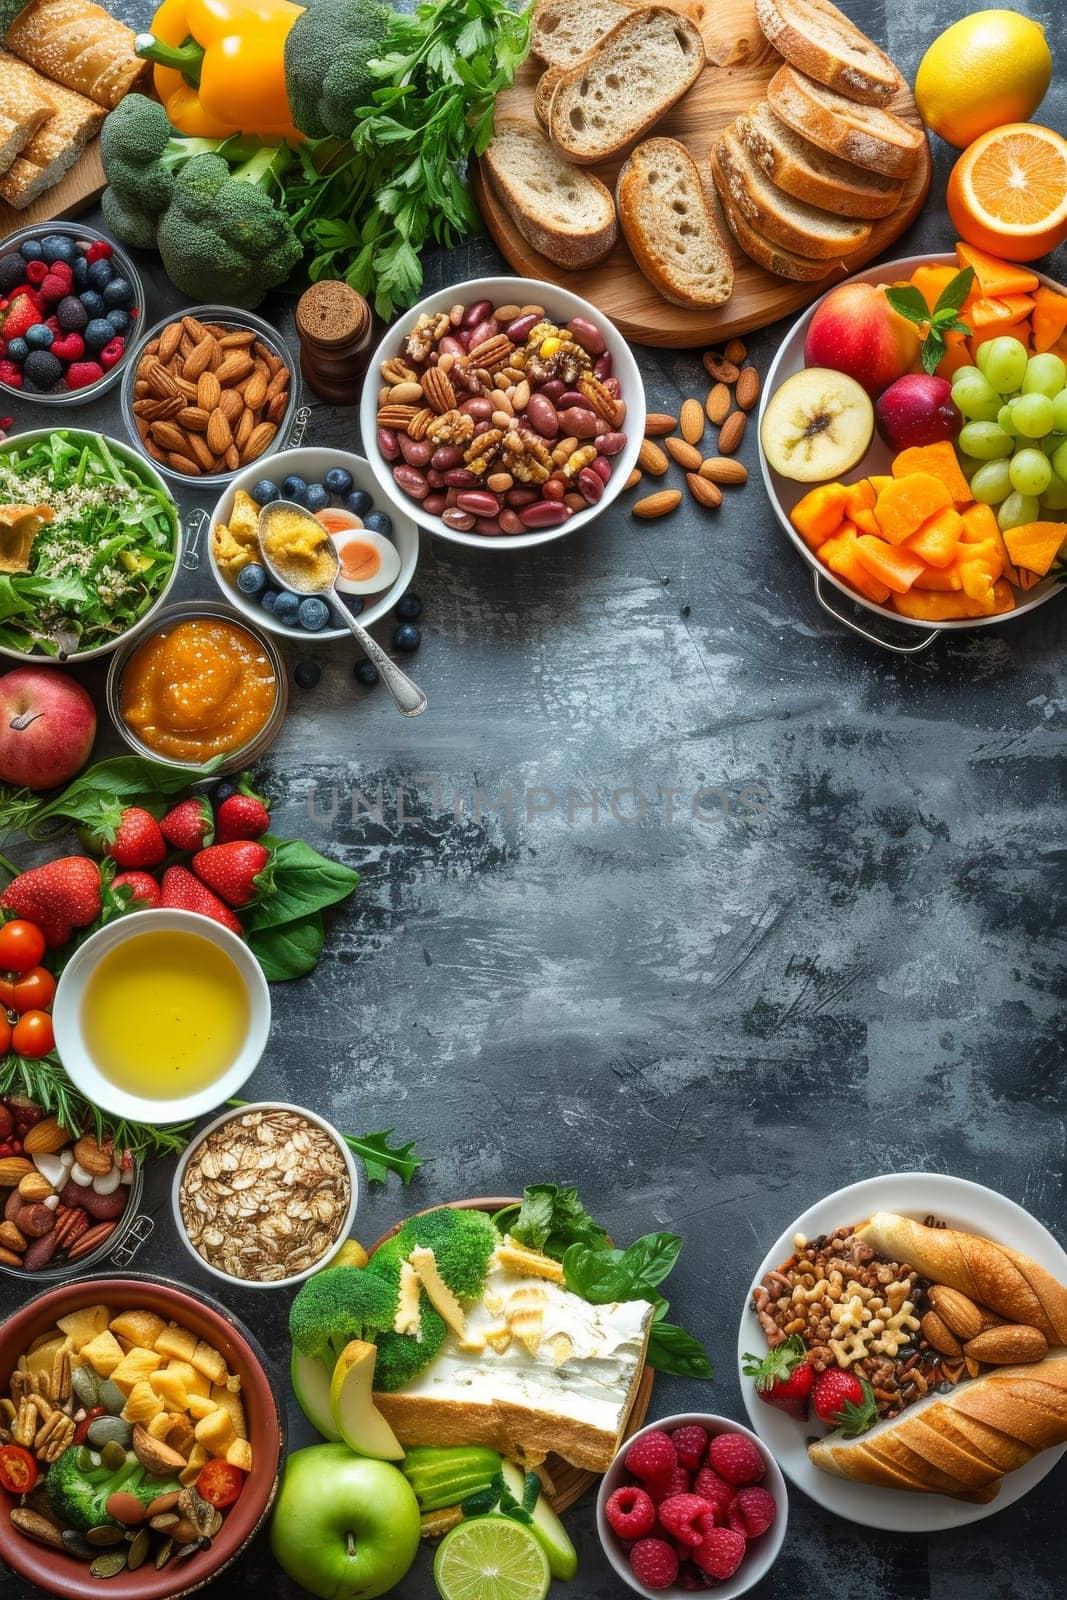 A table full of healthy food options including fruits, vegetables, and bread. The table is set up in a way that makes it easy to see and access all the food items